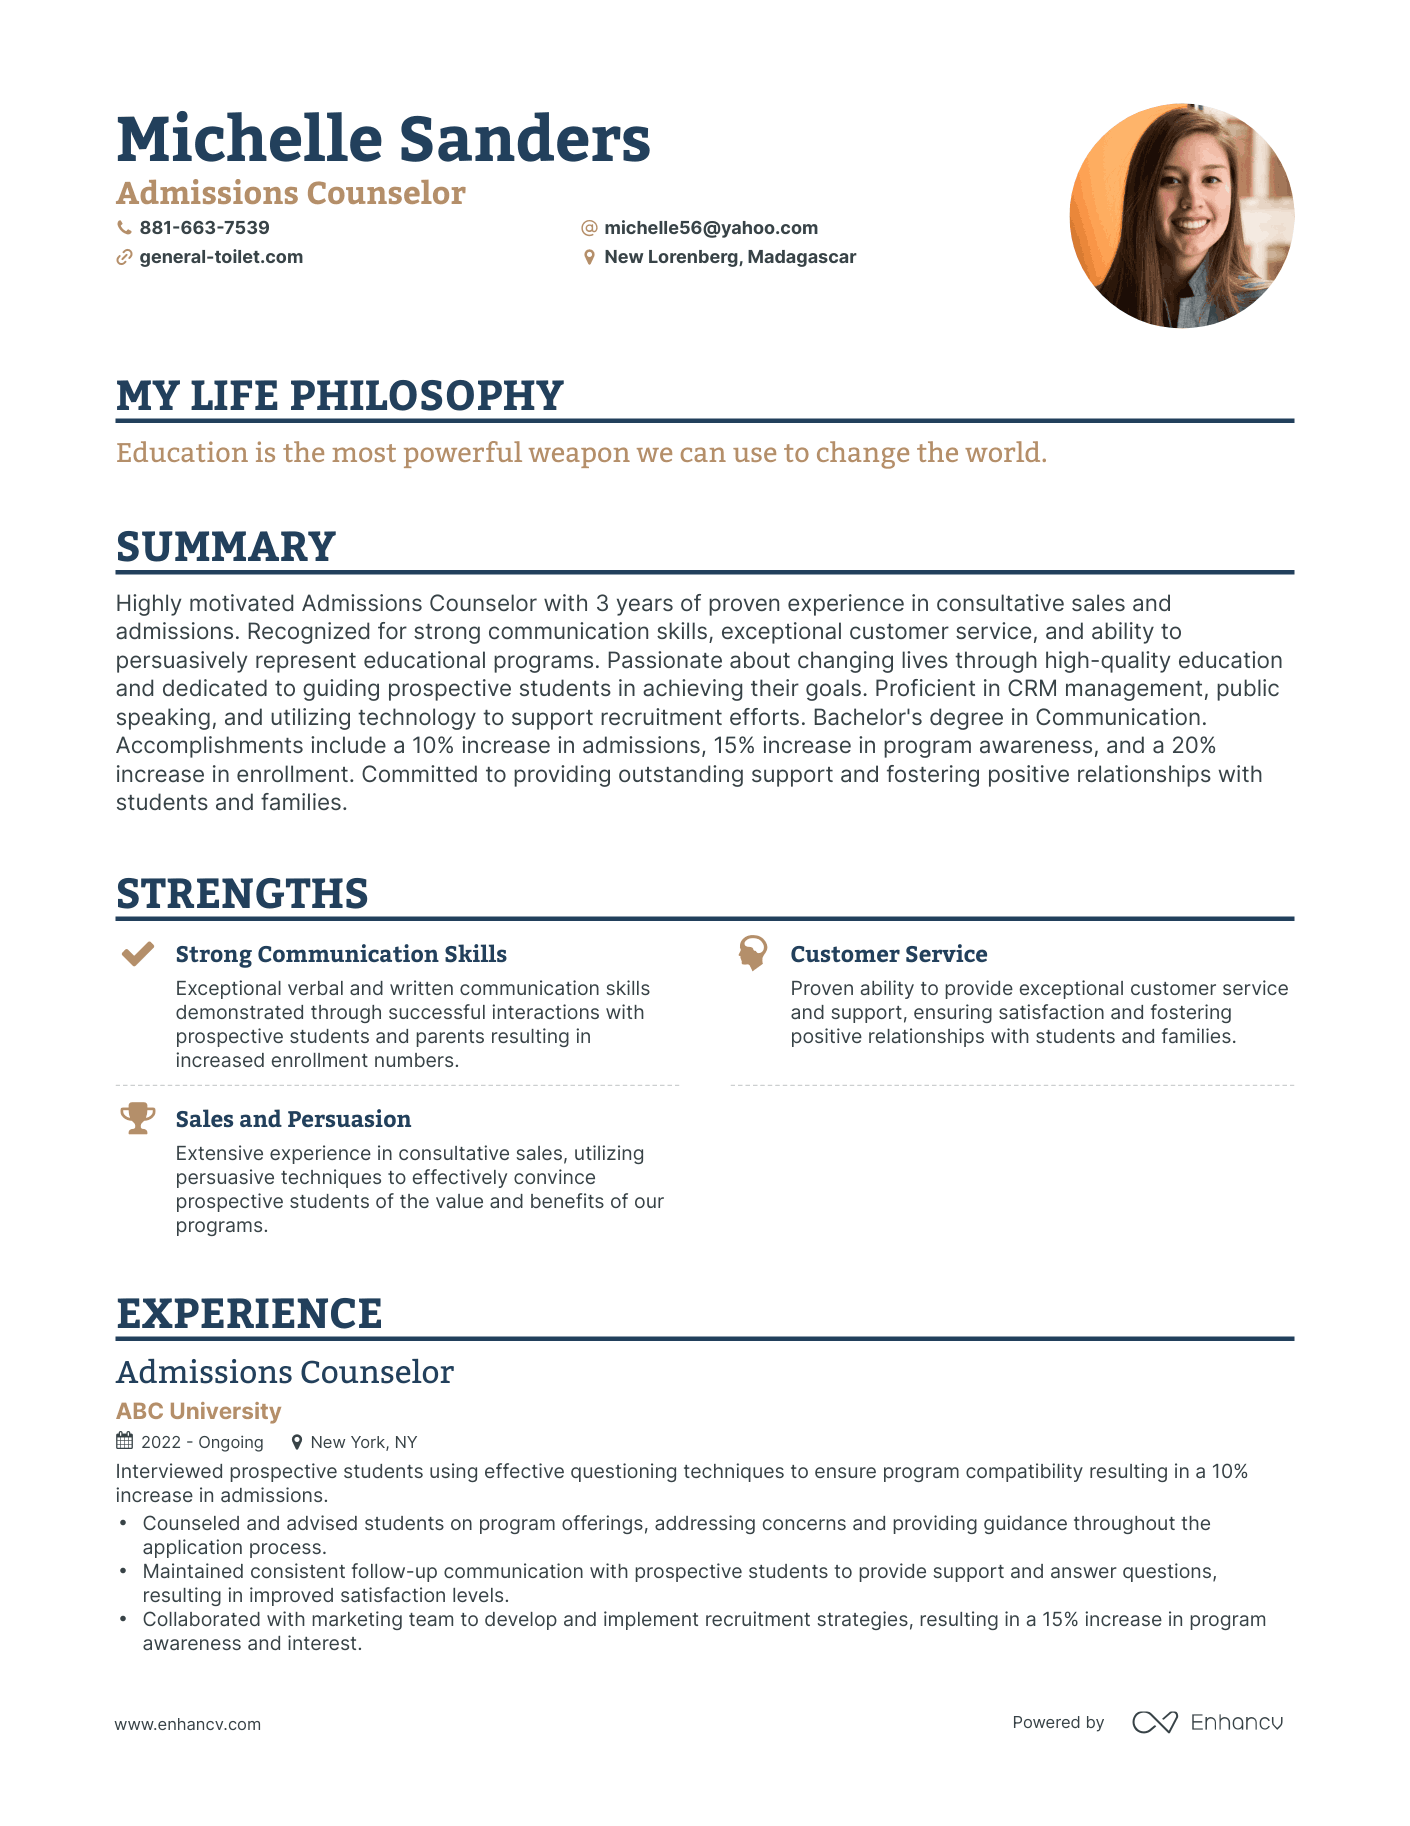 Creative Admissions Counselor Resume Example